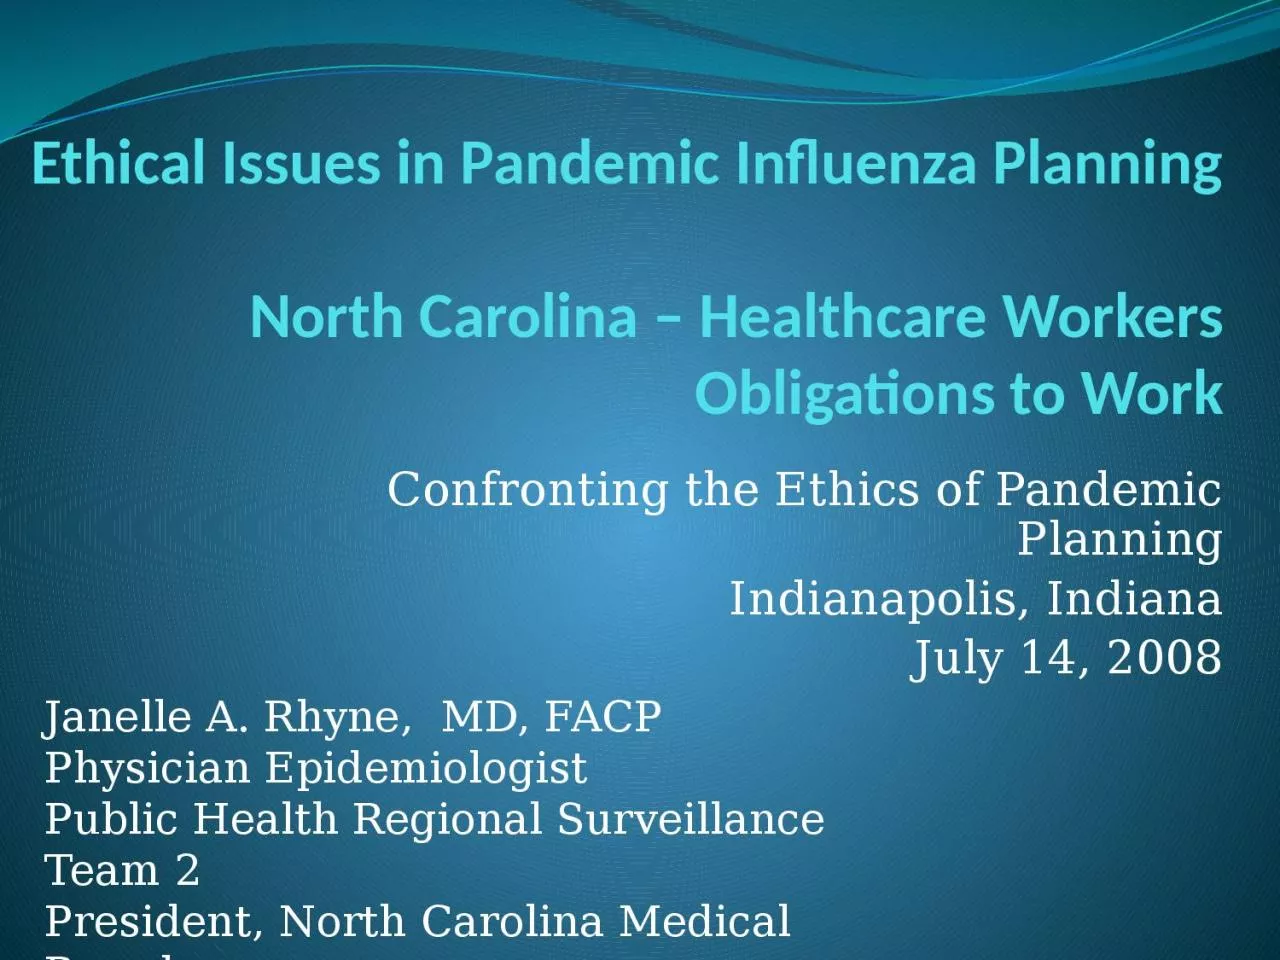 Ethical Issues in Pandemic Influenza Planning